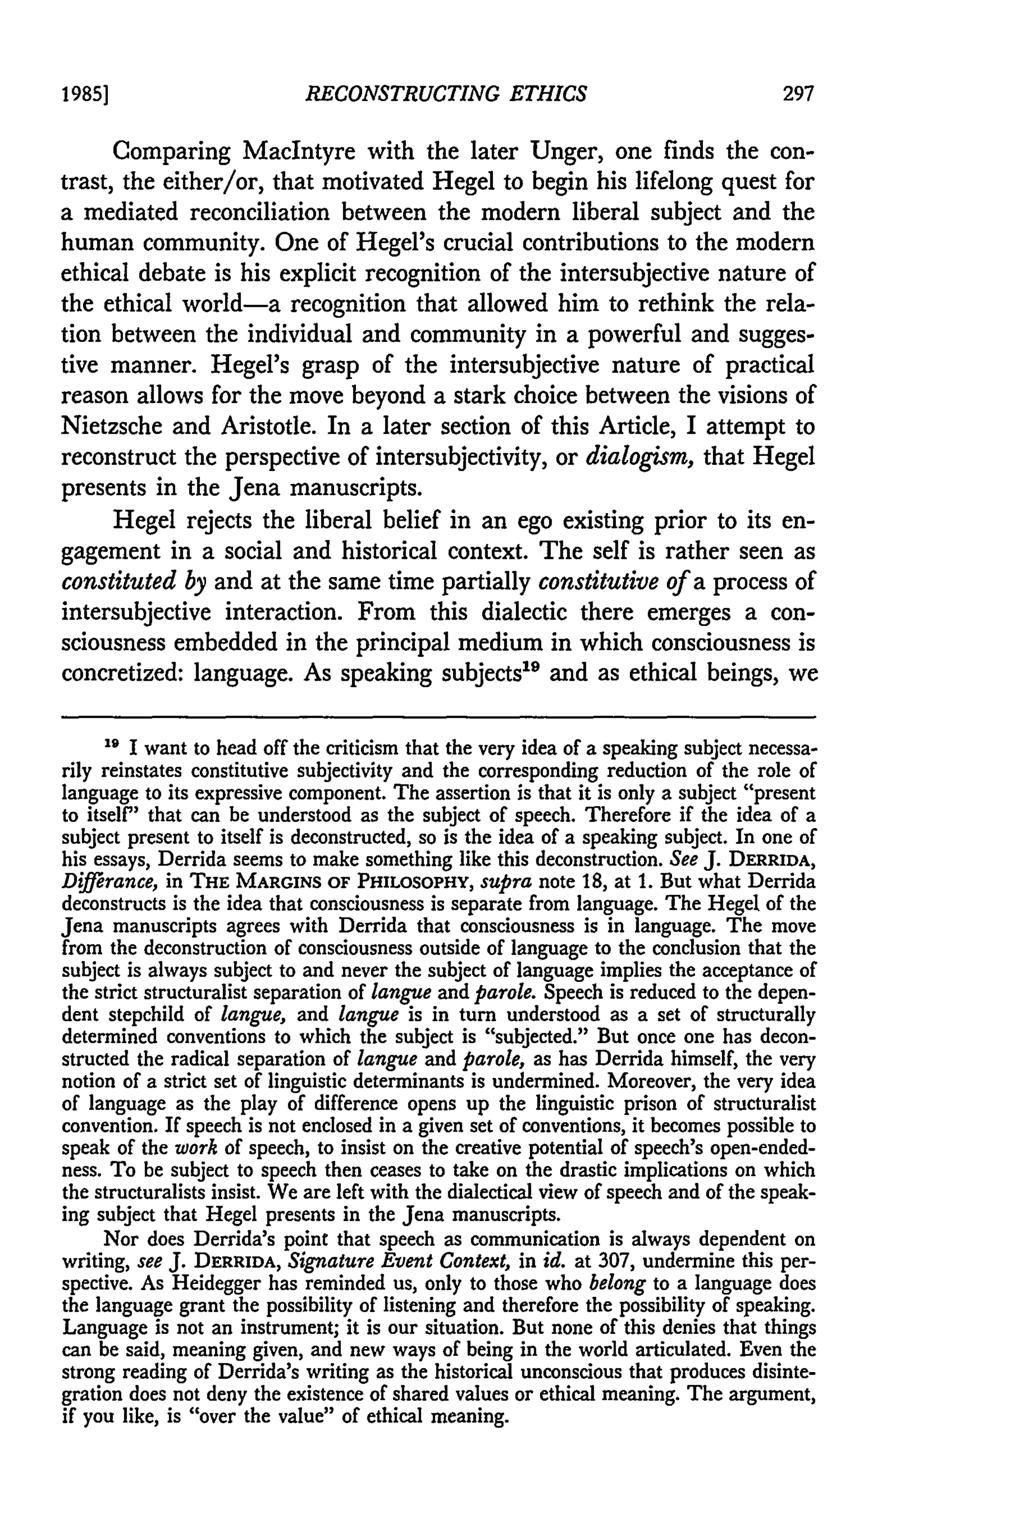 1985] RECONSTRUCTING ETHICS Comparing Maclntyre with the later Unger, one finds the contrast, the either/or, that motivated Hegel to begin his lifelong quest for a mediated reconciliation between the